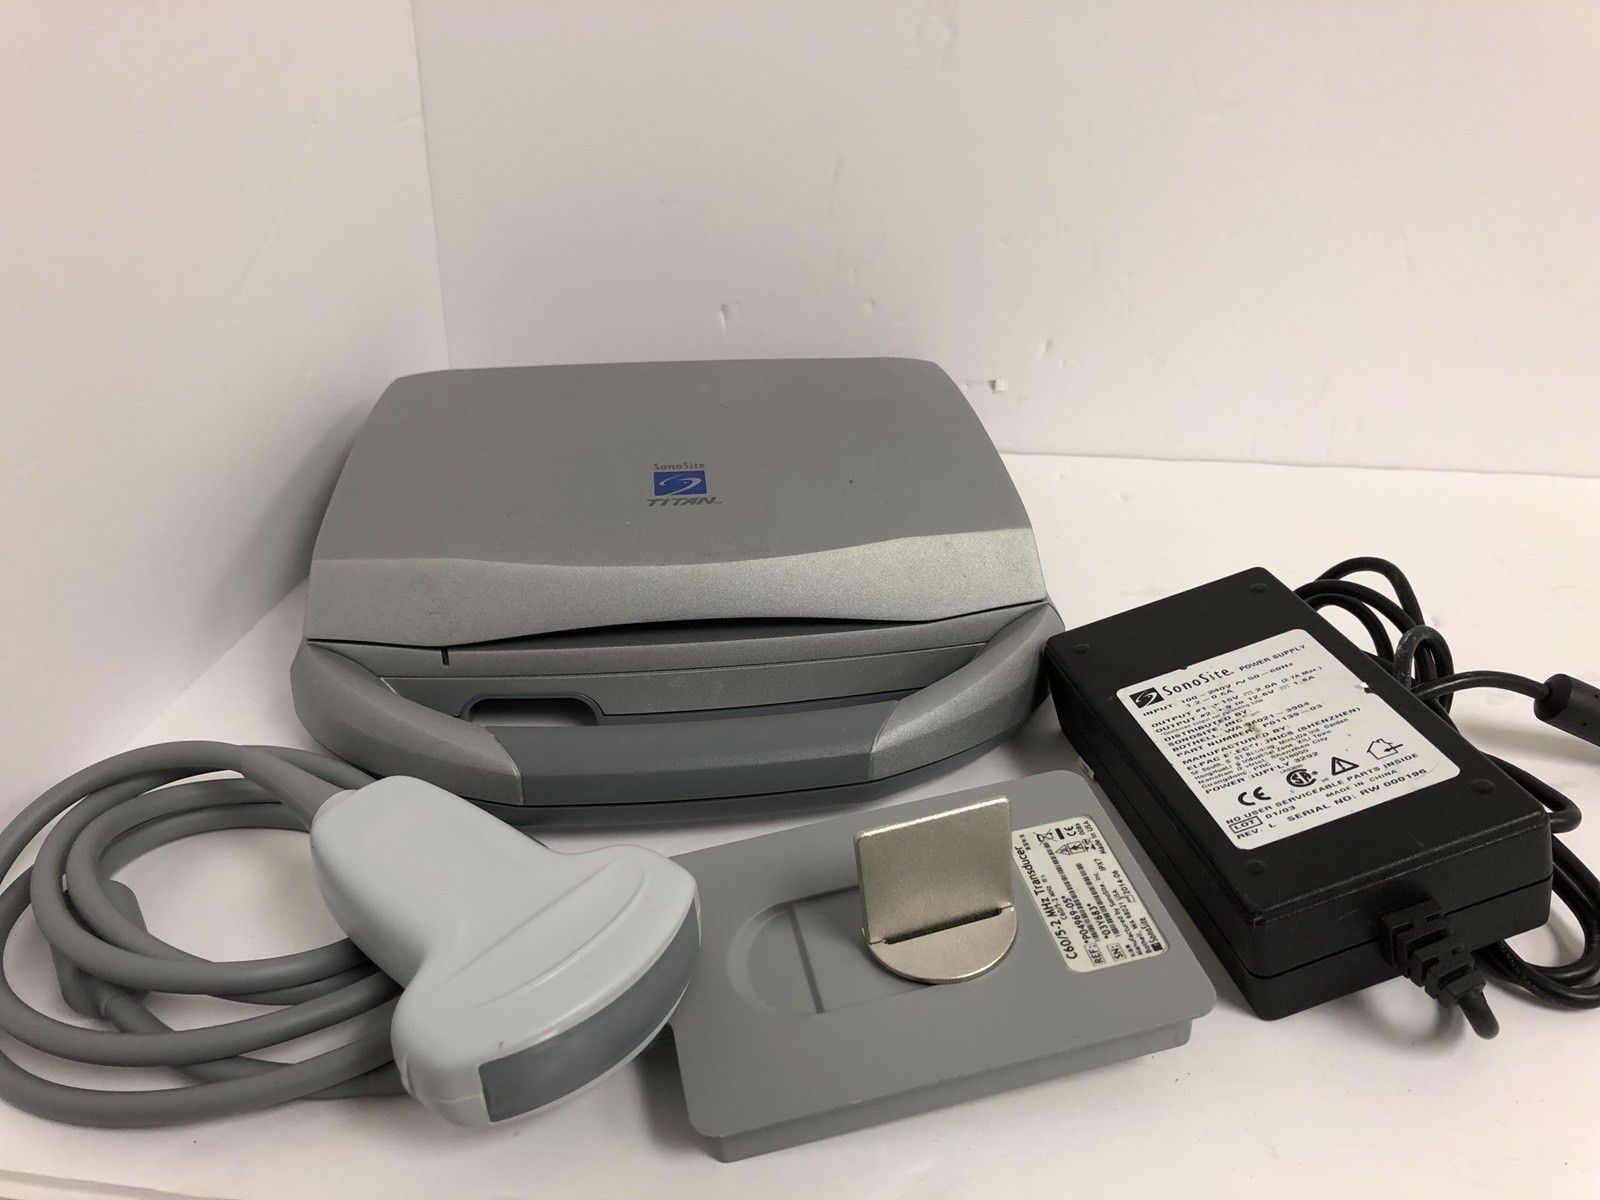 SONOSITE TITAN Ultrasound With C60/5-2 Convex Array Probe And Power Supply DIAGNOSTIC ULTRASOUND MACHINES FOR SALE